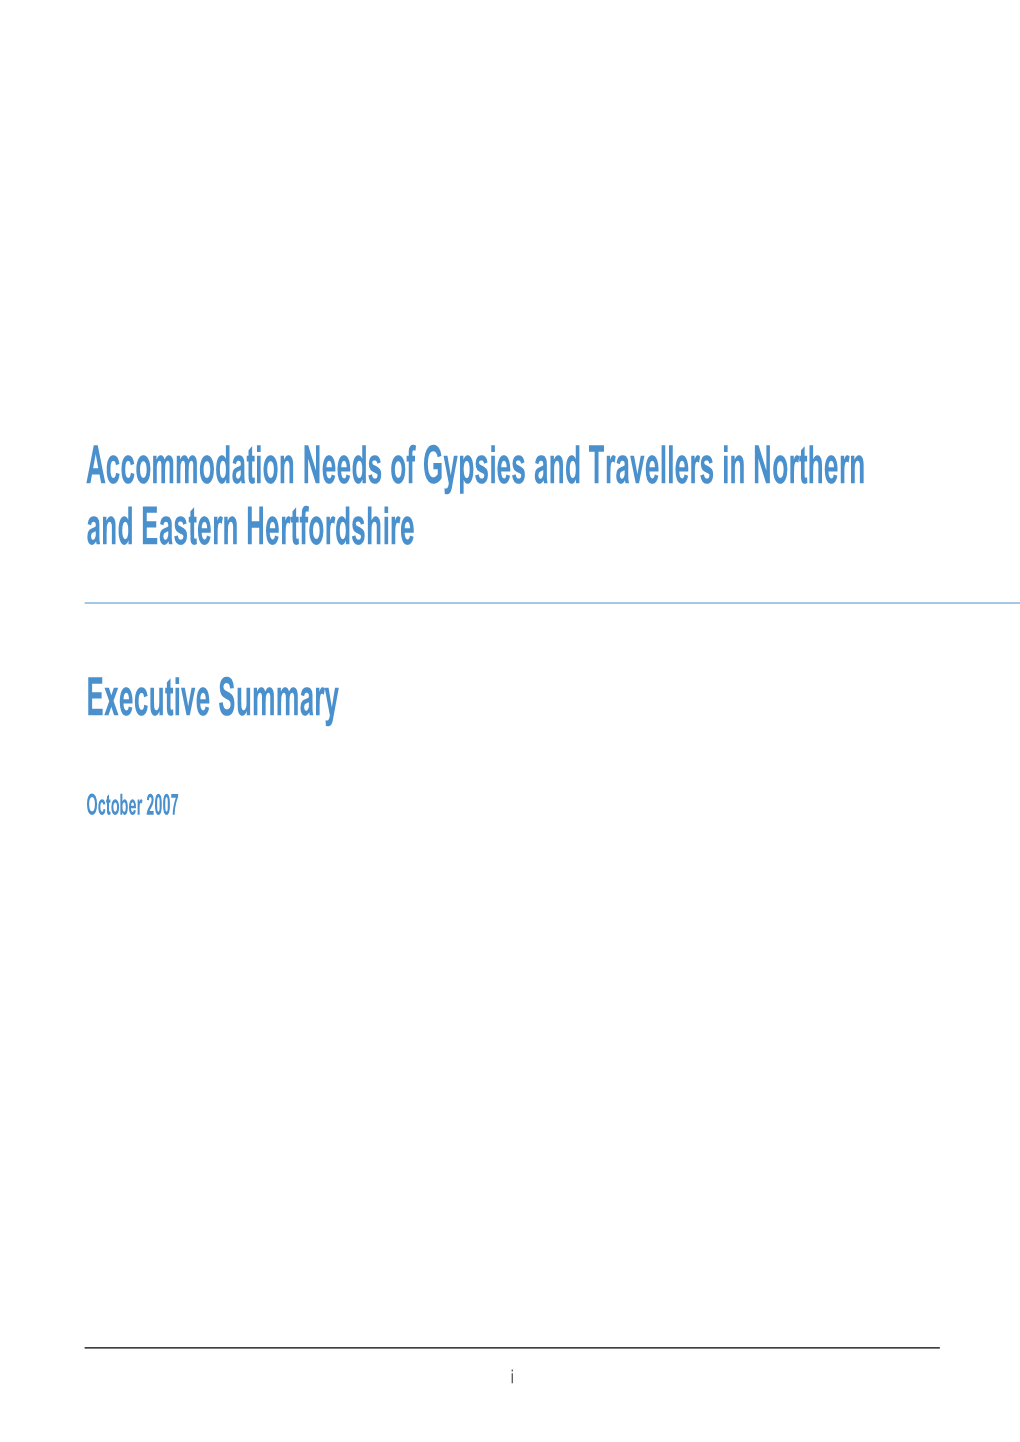 Accommodation Needs of Gypsies and Travellers in Northern and Eastern Hertfordshire